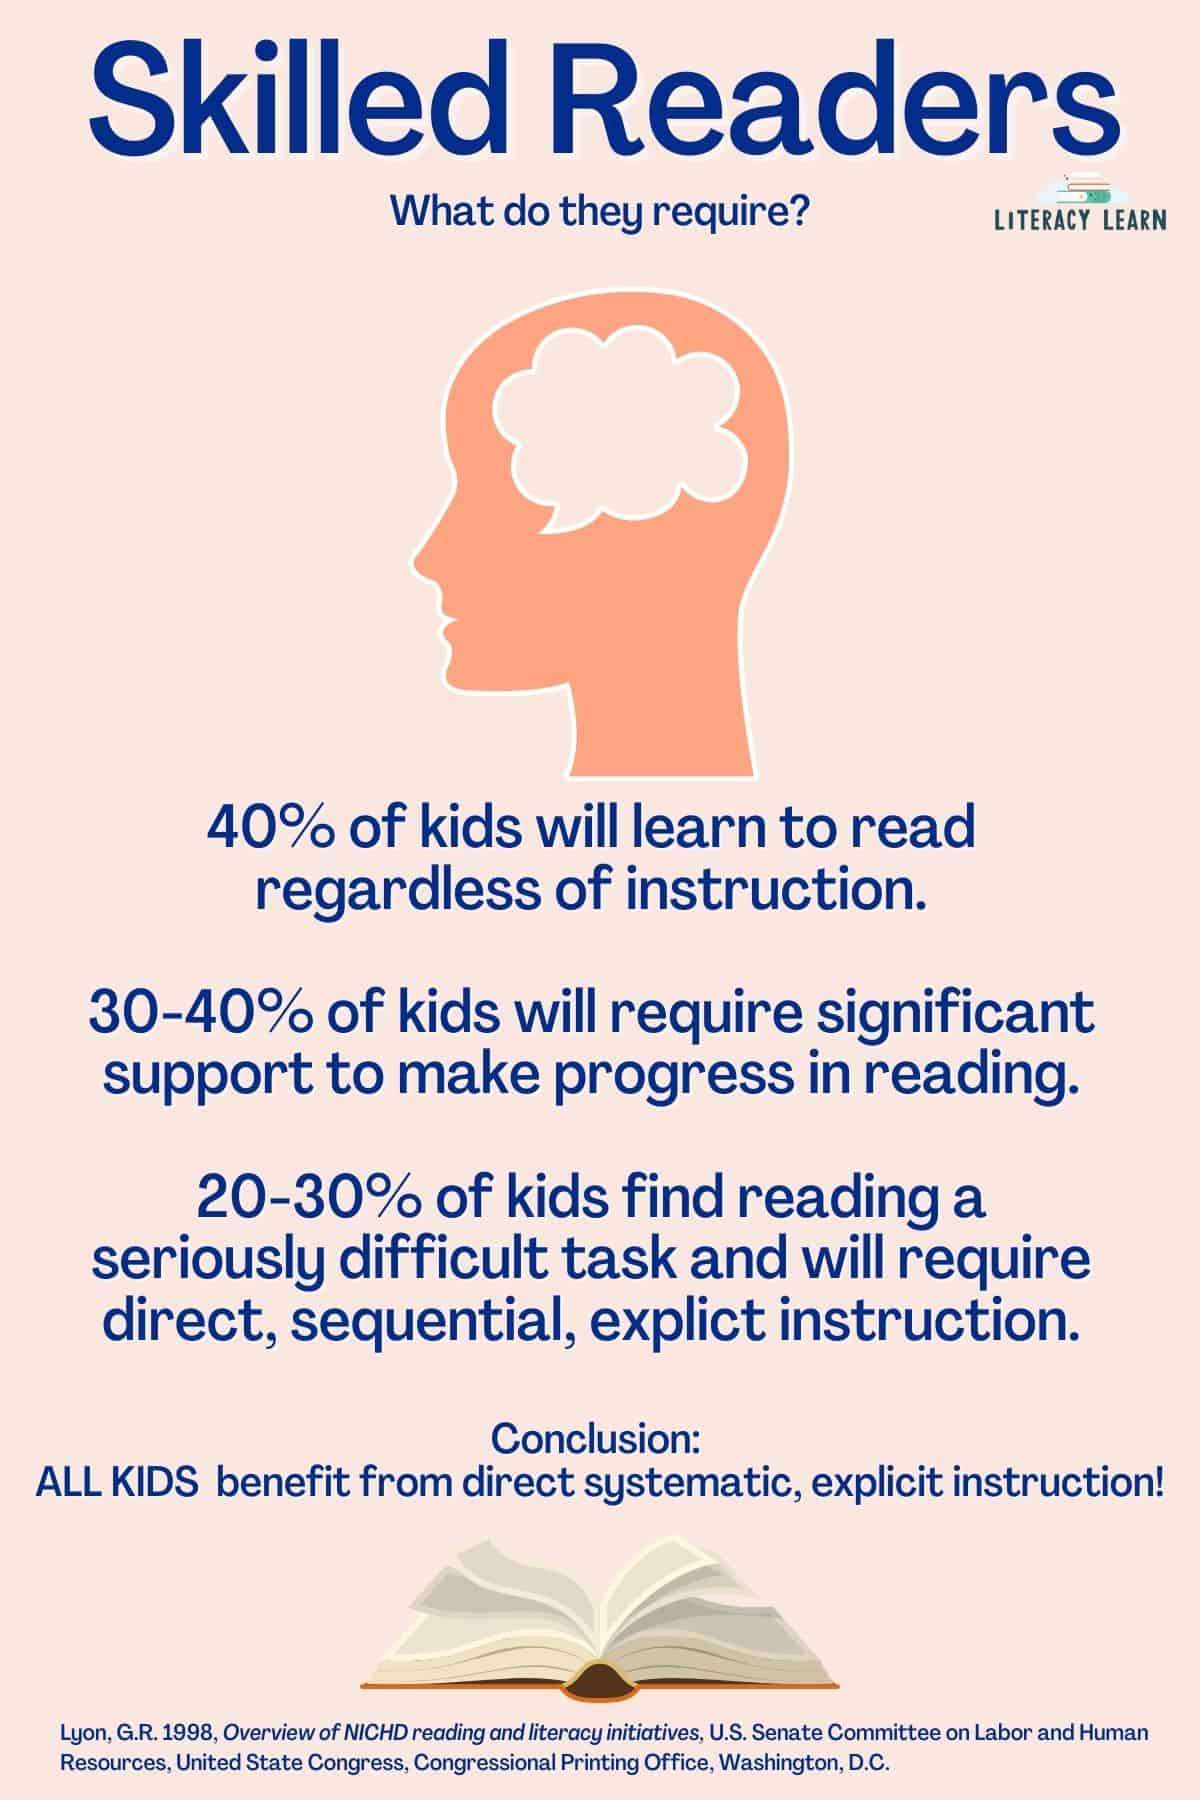 Graphic with statistics and data showing that most skilled readers require explicit instruction.